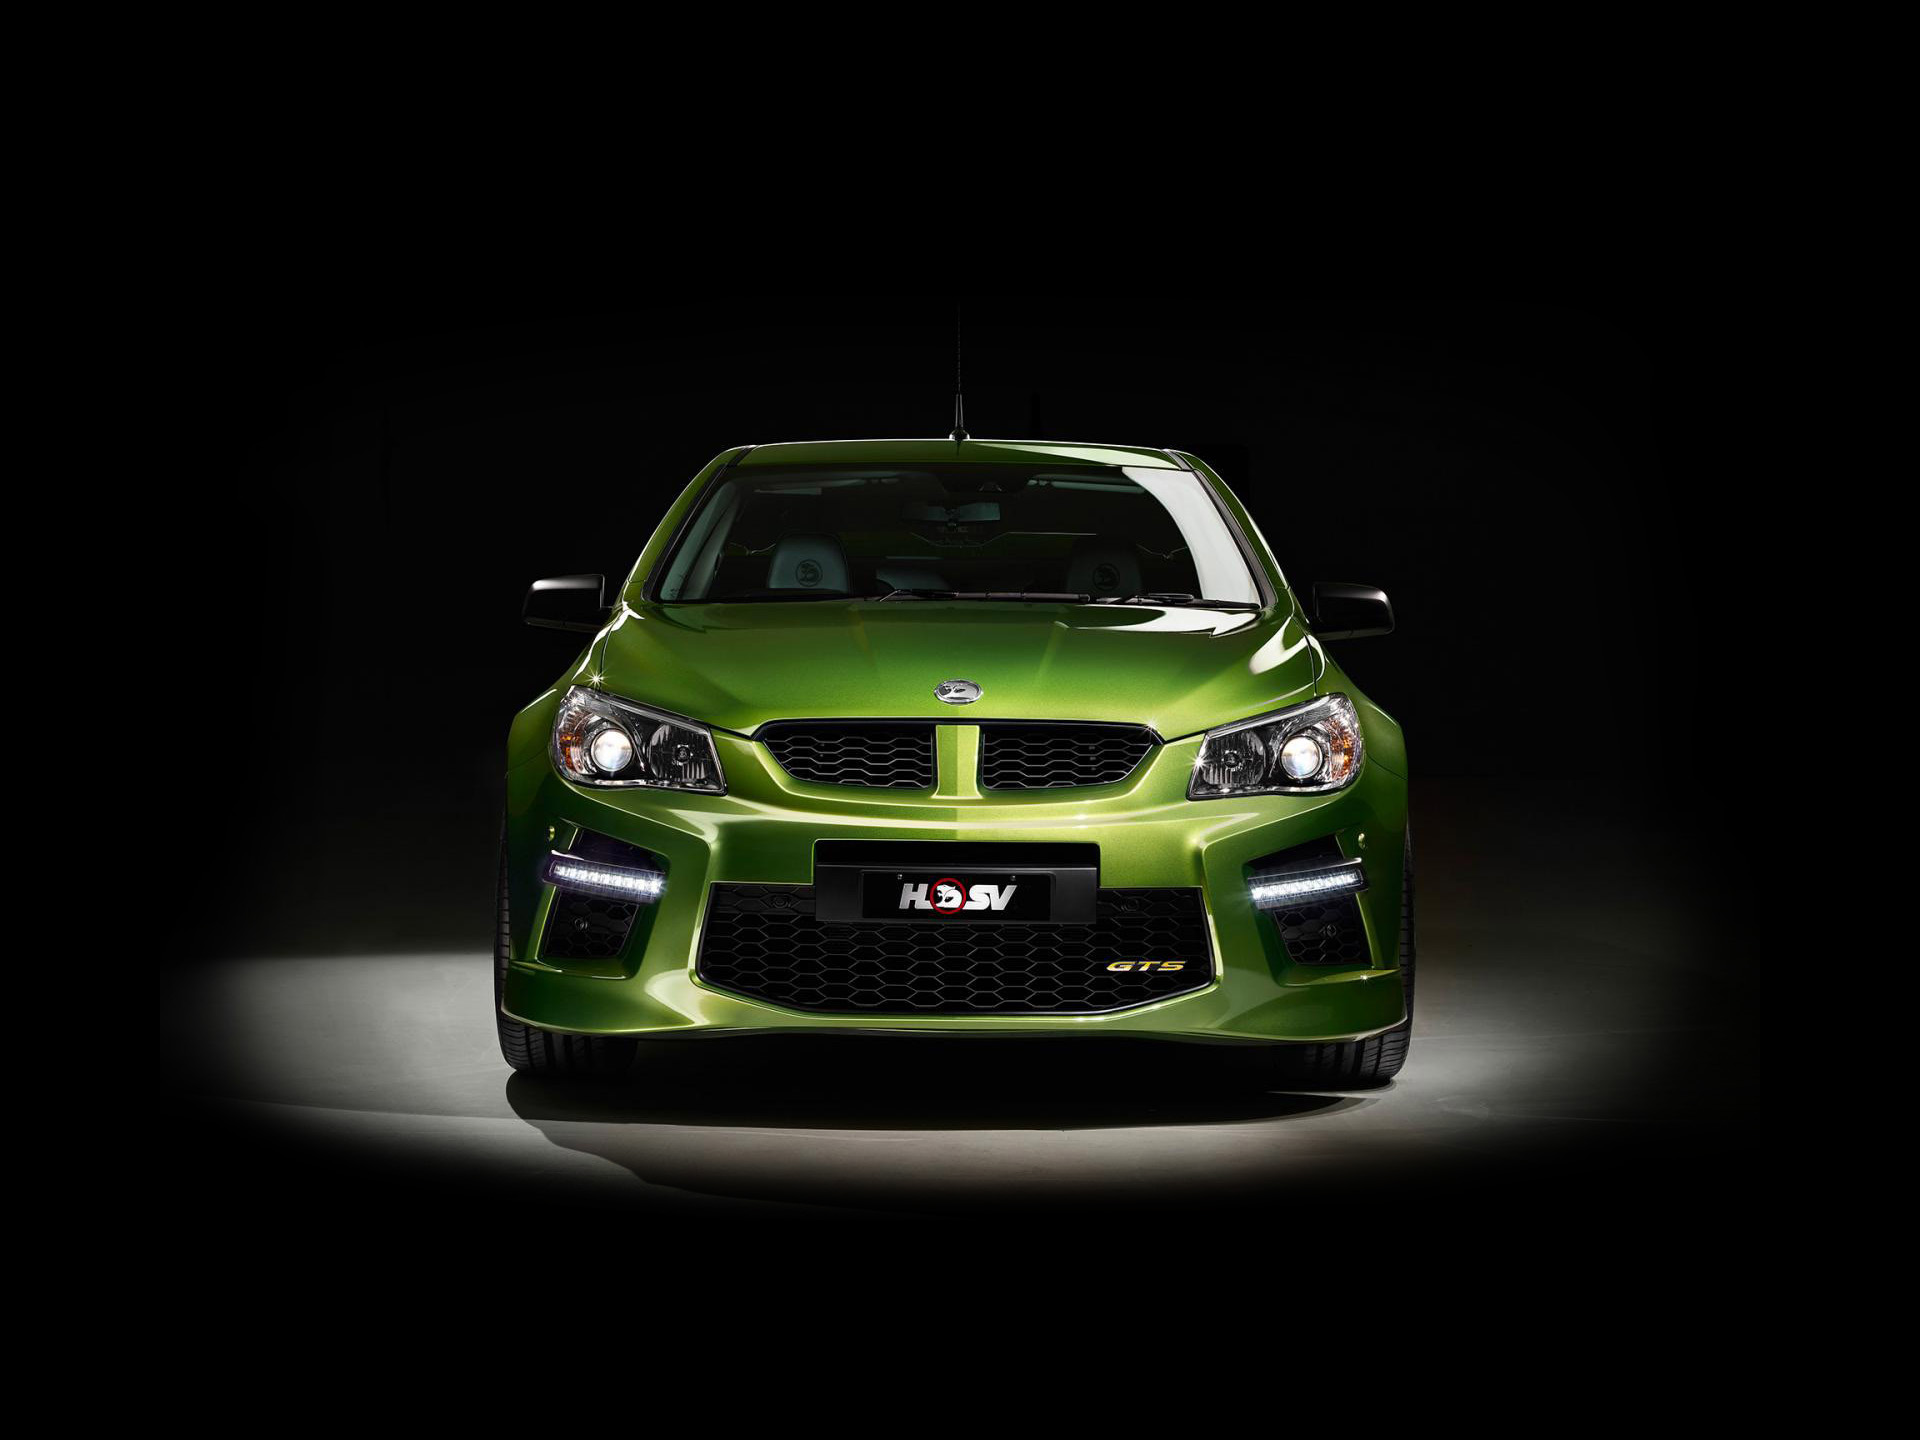 Free download wallpaper Car, Holden, Vehicles, Green Car, Holden Hsv Gts Maloo on your PC desktop